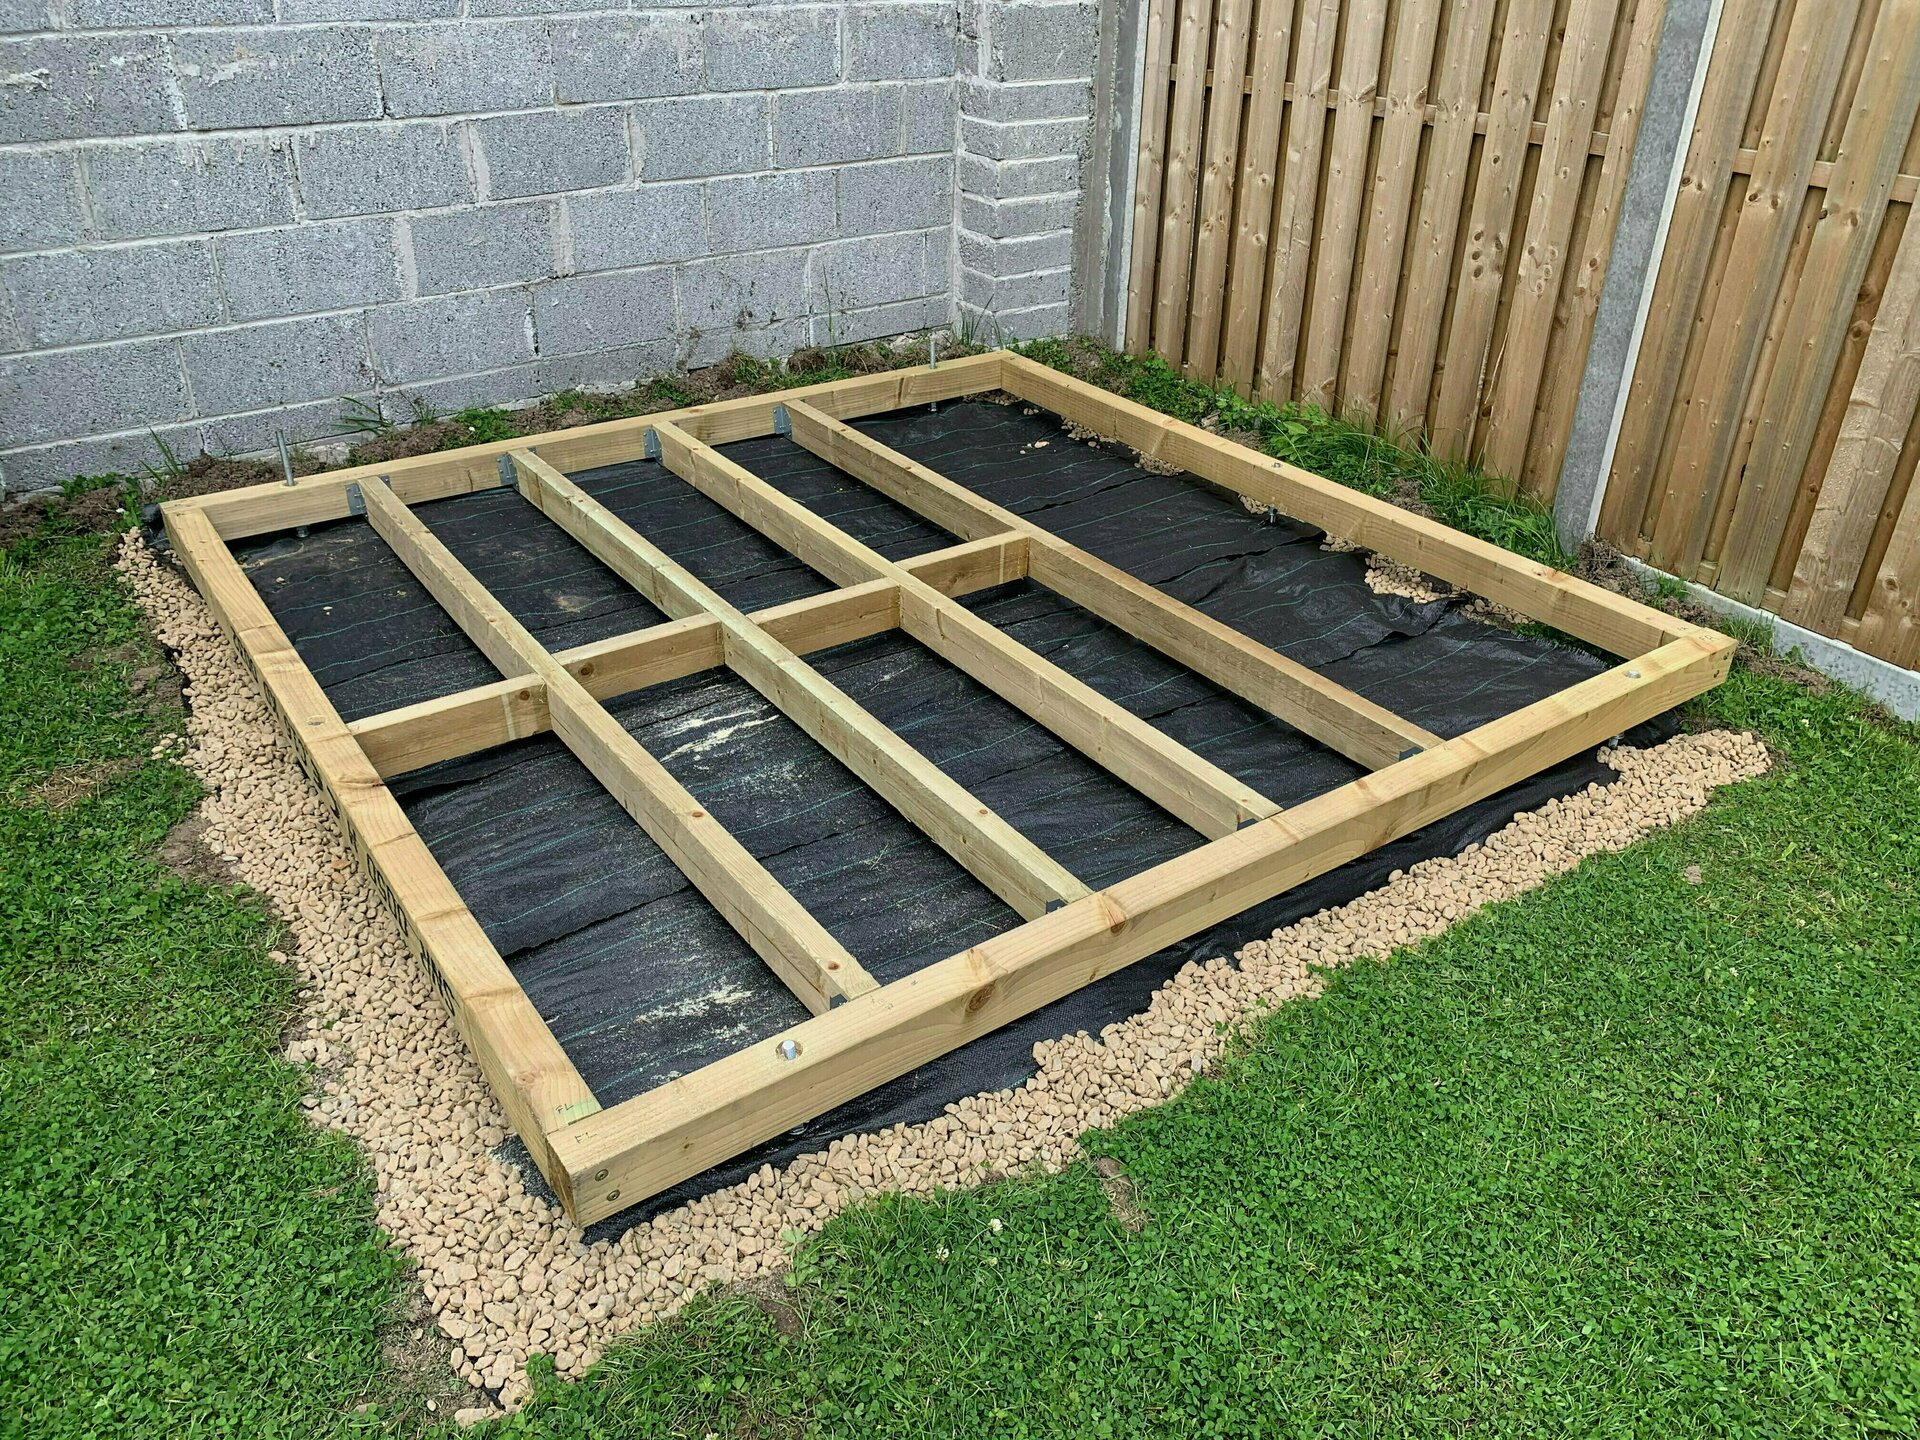 DIY Garden Shed Build - Part 1: Foundations and Base | Diarmuid.ie